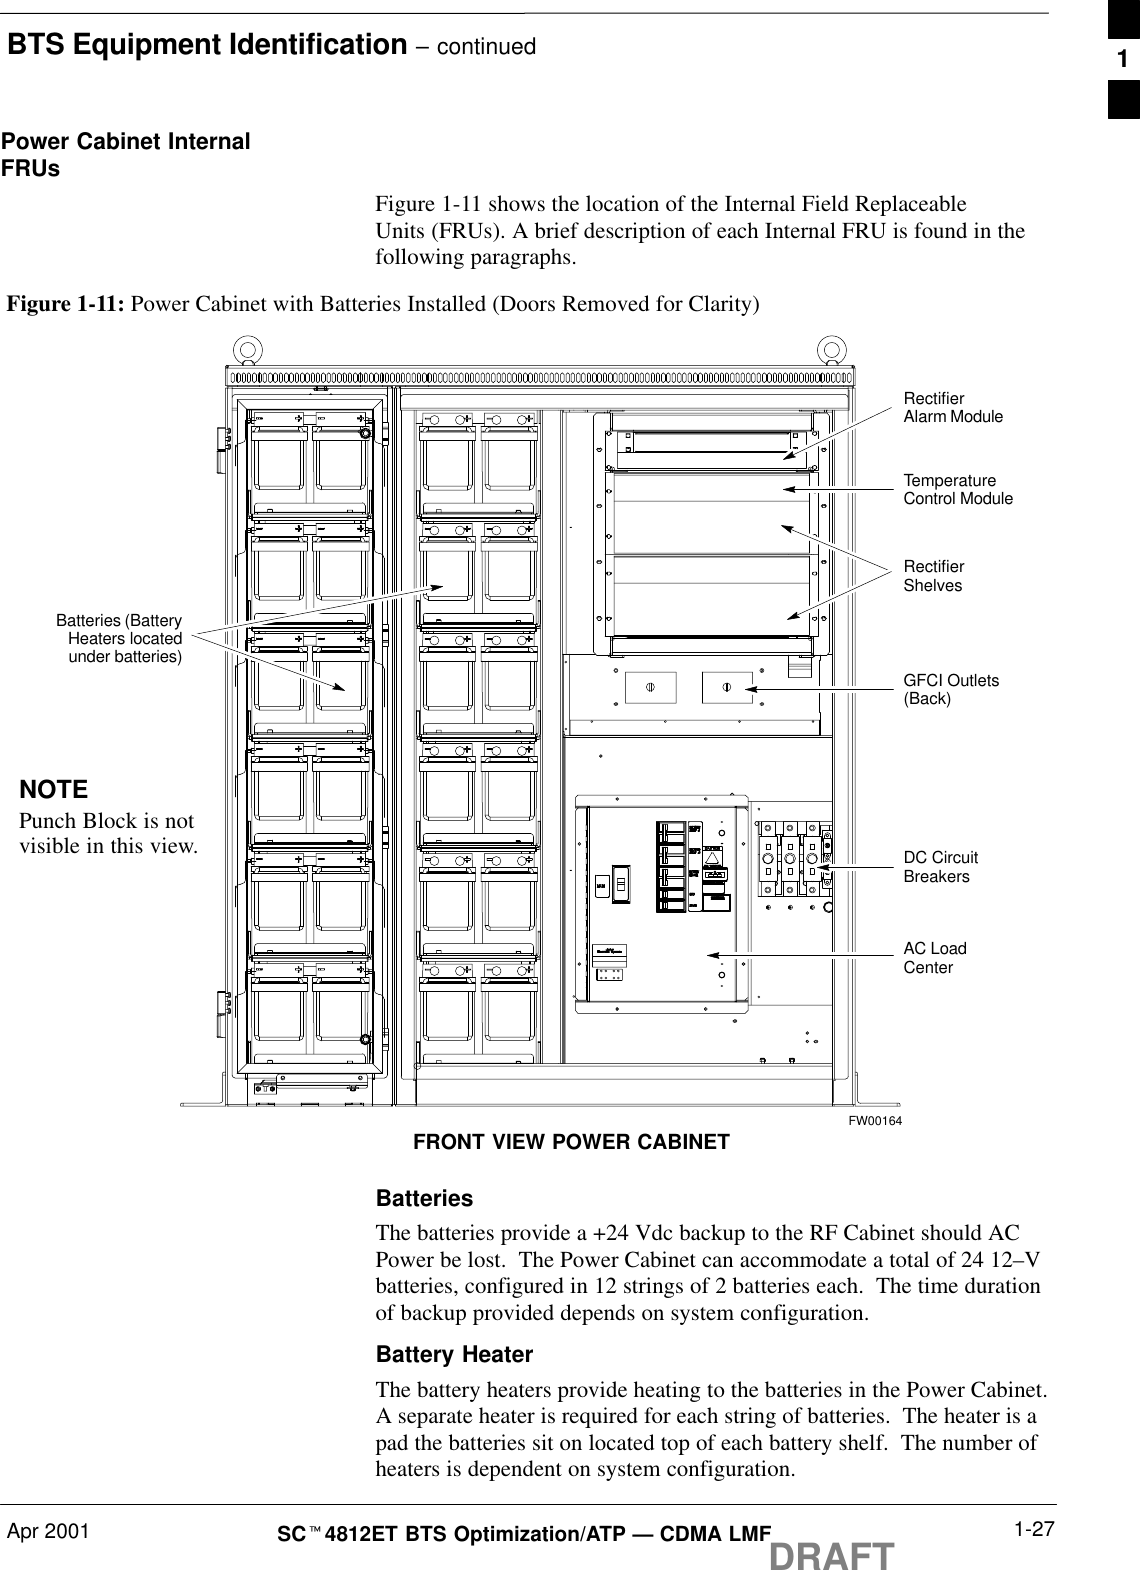 BTS Equipment Identification – continuedApr 2001 1-27SCt4812ET BTS Optimization/ATP — CDMA LMFDRAFTPower Cabinet InternalFRUsFigure 1-11 shows the location of the Internal Field ReplaceableUnits (FRUs). A brief description of each Internal FRU is found in thefollowing paragraphs.Figure 1-11: Power Cabinet with Batteries Installed (Doors Removed for Clarity)NOTEPunch Block is notvisible in this view.RectifierShelvesRectifierAlarm ModuleDC CircuitBreakersAC LoadCenterGFCI Outlets(Back)TemperatureControl ModuleFRONT VIEW POWER CABINETBatteries (BatteryHeaters locatedunder batteries)FW00164BatteriesThe batteries provide a +24 Vdc backup to the RF Cabinet should ACPower be lost.  The Power Cabinet can accommodate a total of 24 12–Vbatteries, configured in 12 strings of 2 batteries each.  The time durationof backup provided depends on system configuration.Battery HeaterThe battery heaters provide heating to the batteries in the Power Cabinet.A separate heater is required for each string of batteries.  The heater is apad the batteries sit on located top of each battery shelf.  The number ofheaters is dependent on system configuration.1